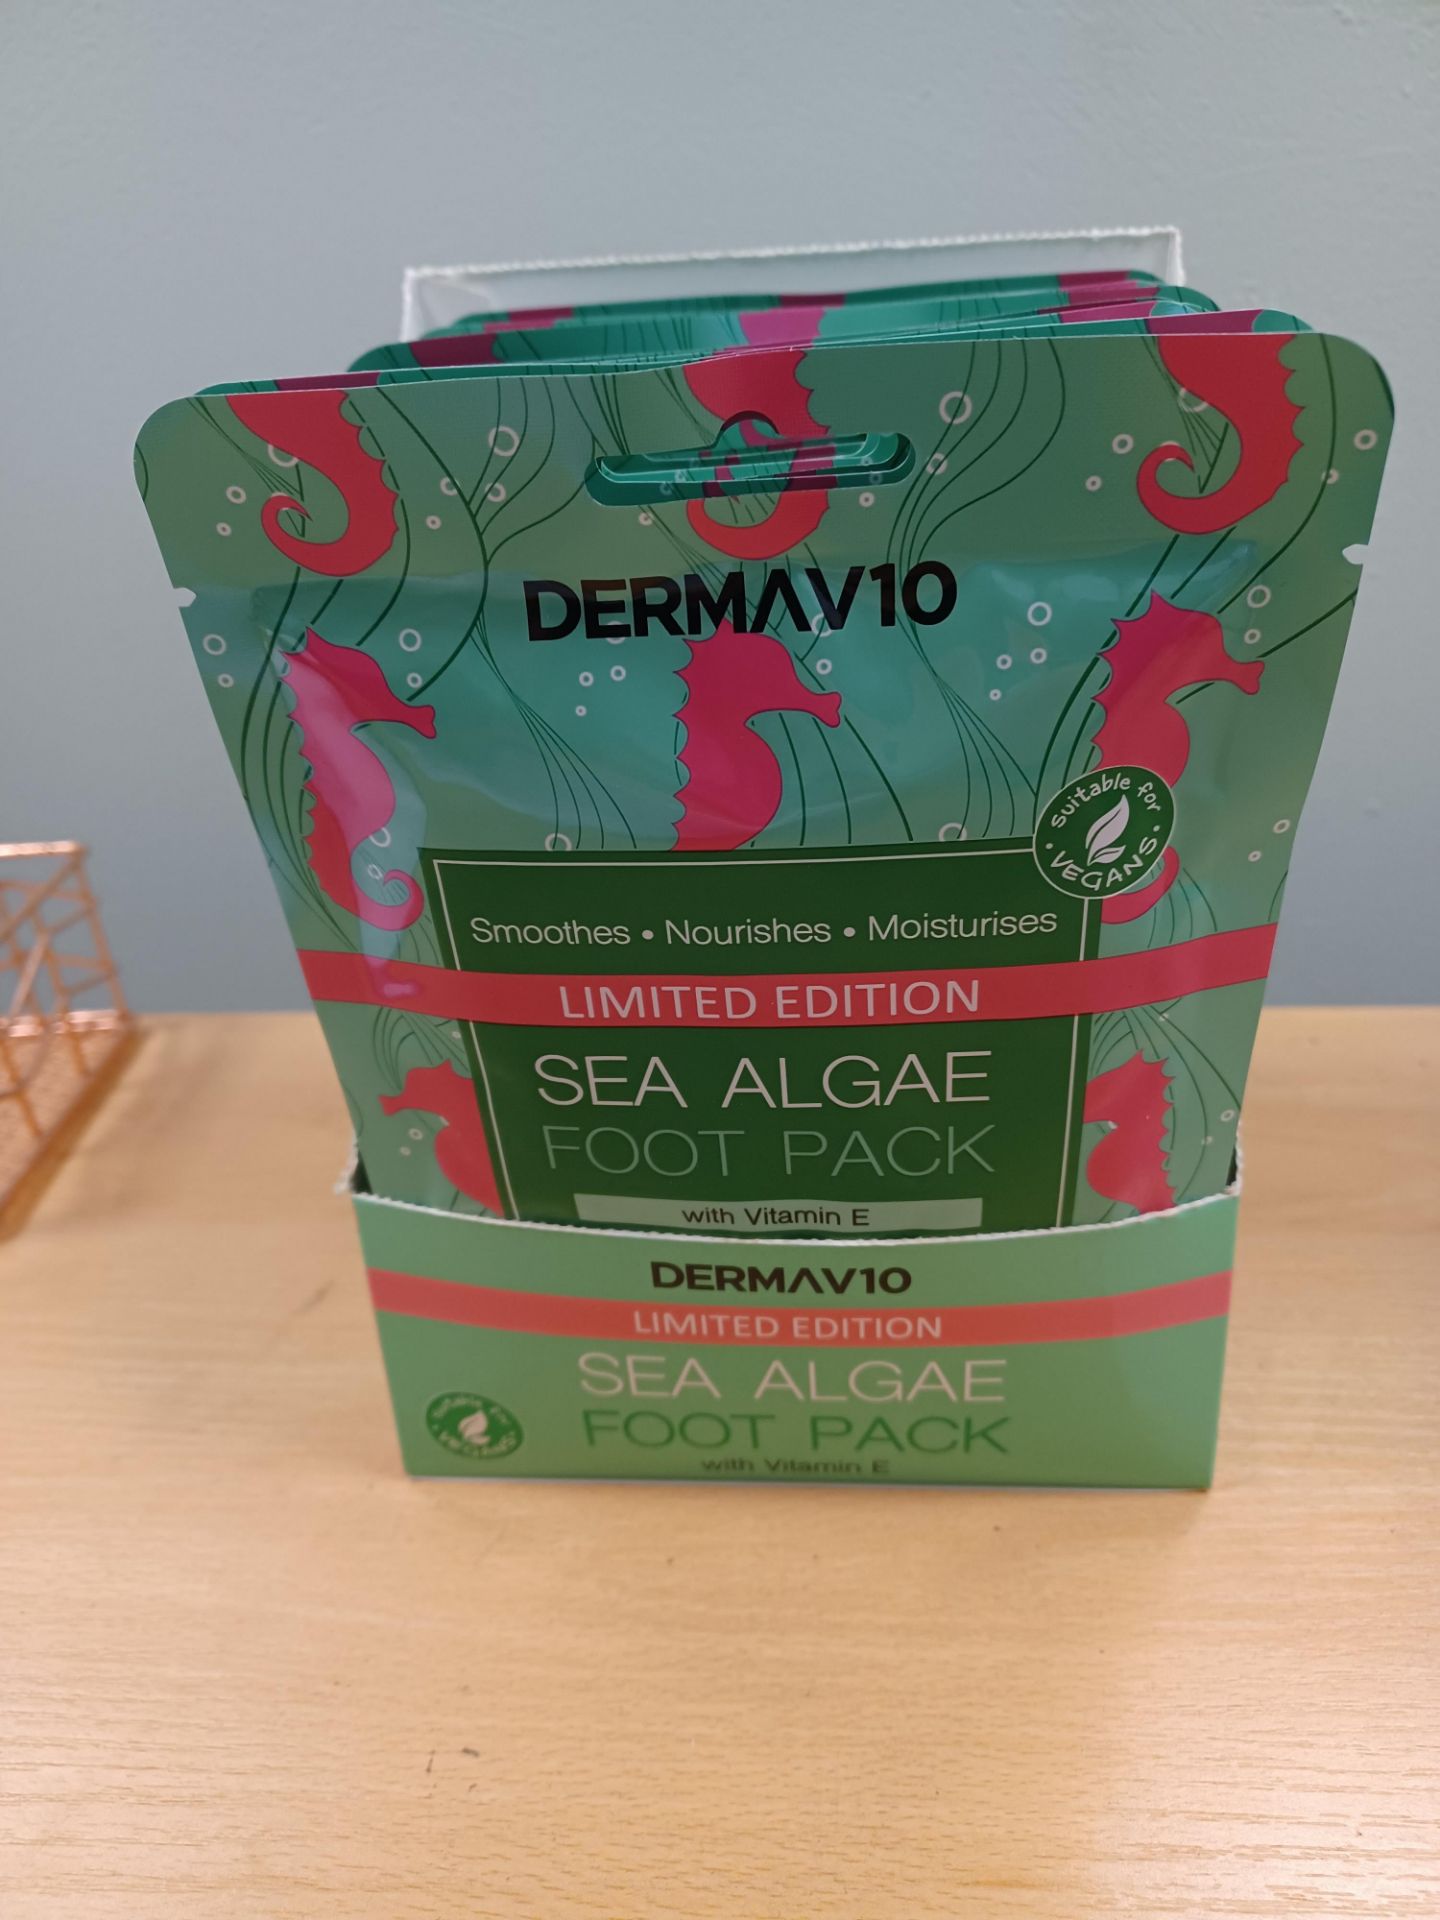 144 X NEW PACKAGED DERMAV10 LIMITED EDITION SEA ALGAE FOOT PACK. WITH VITAMIN E. SOOTHE AND SOFTEN